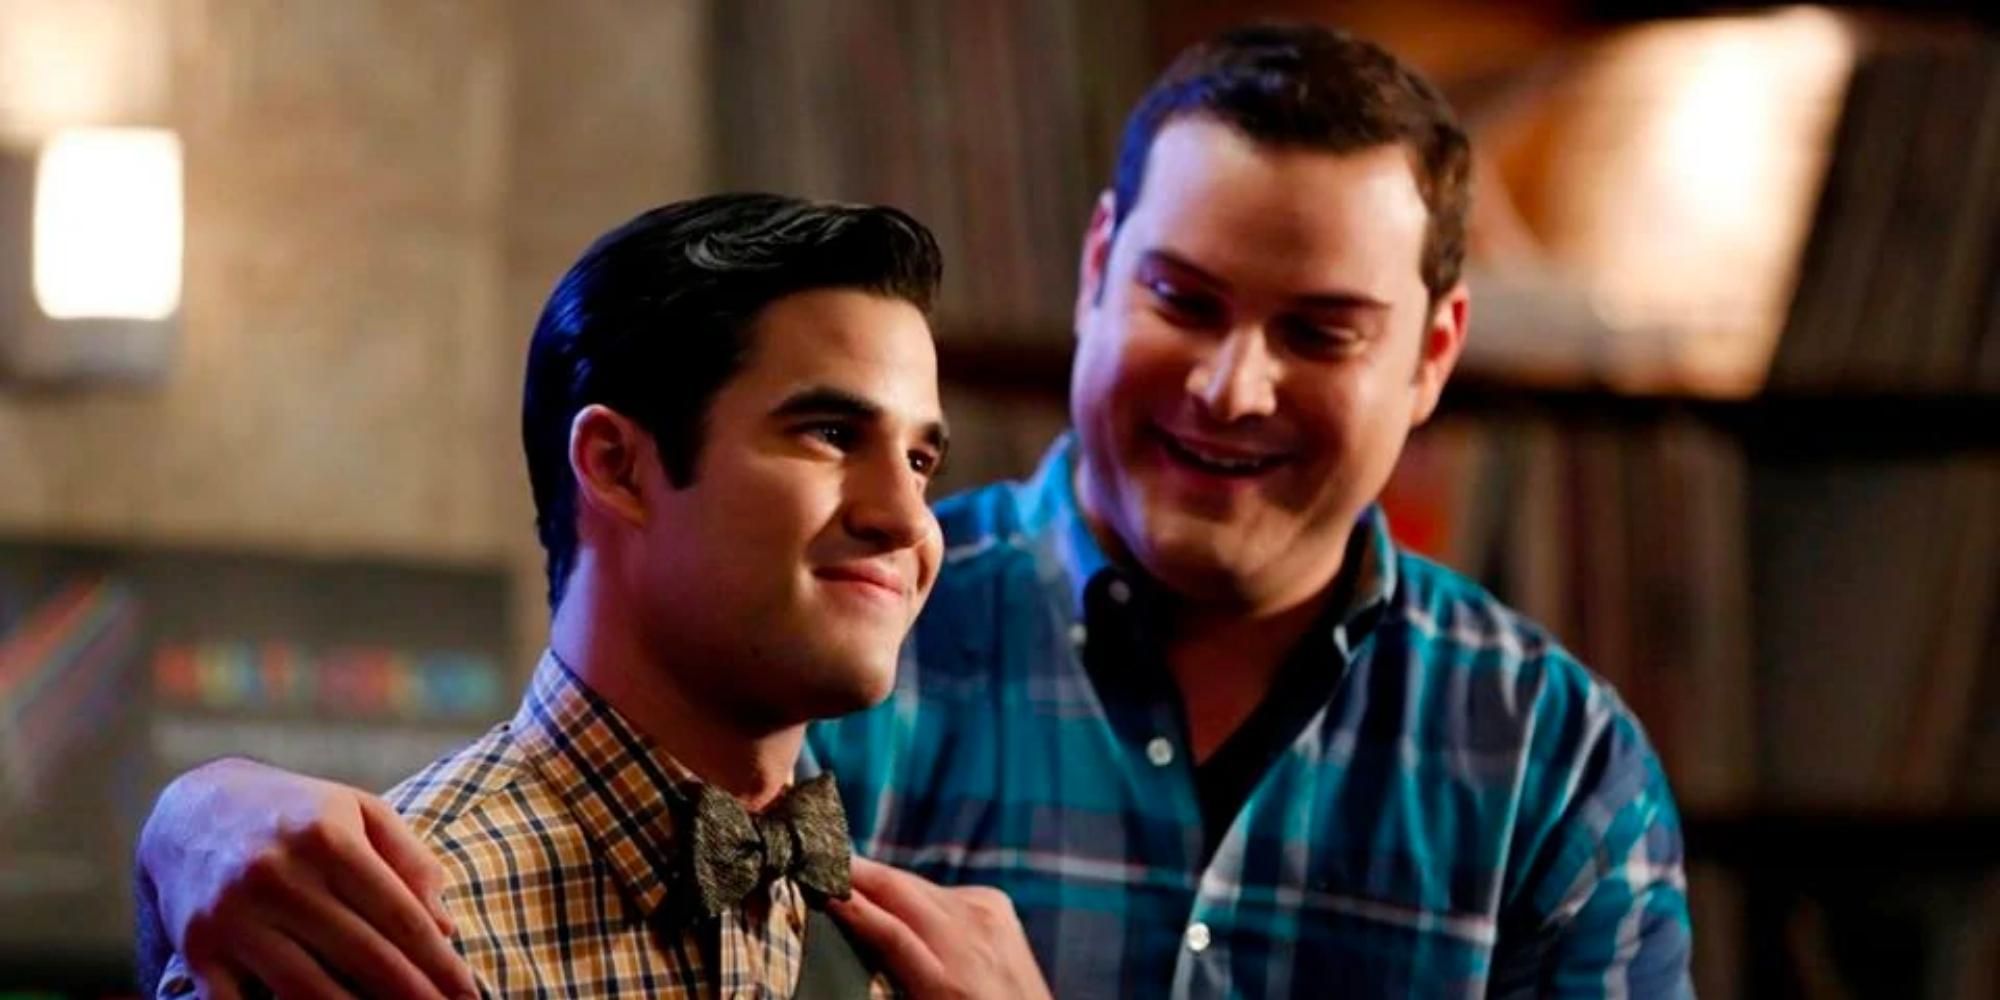 Blaine and Kurofski played by Darren Criss and Max Adler in Glee